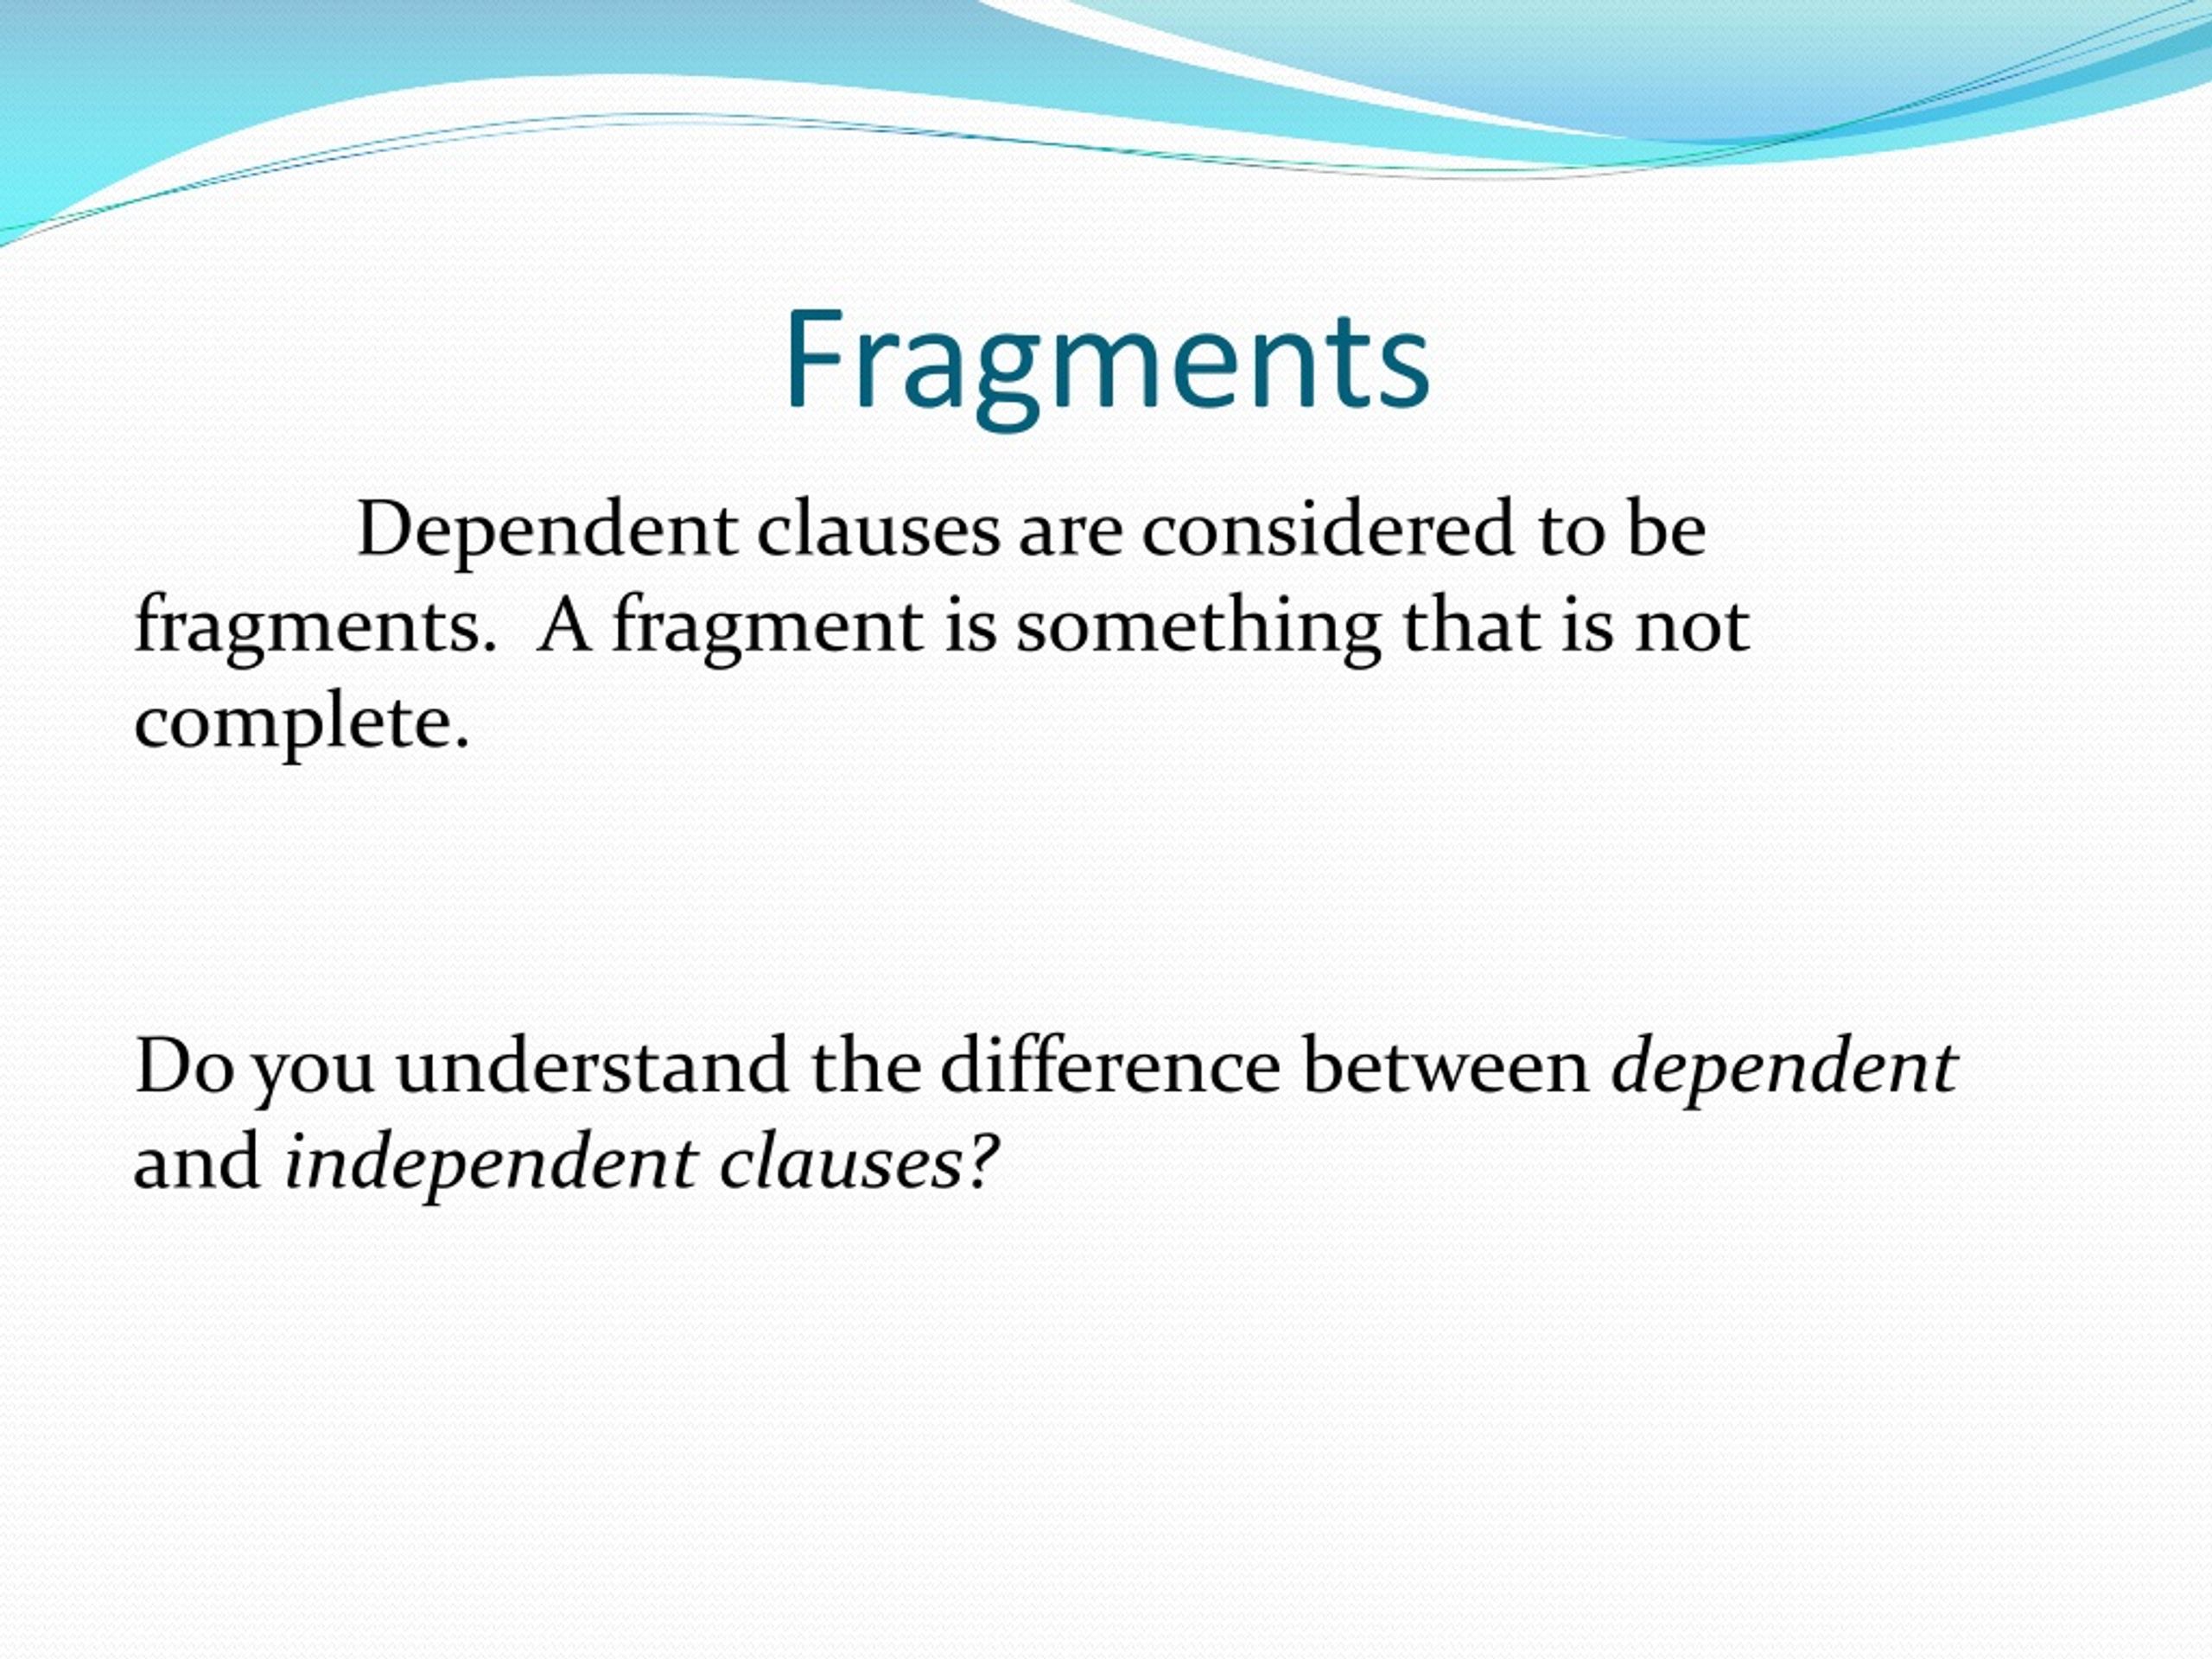 what means also a sentence fragment